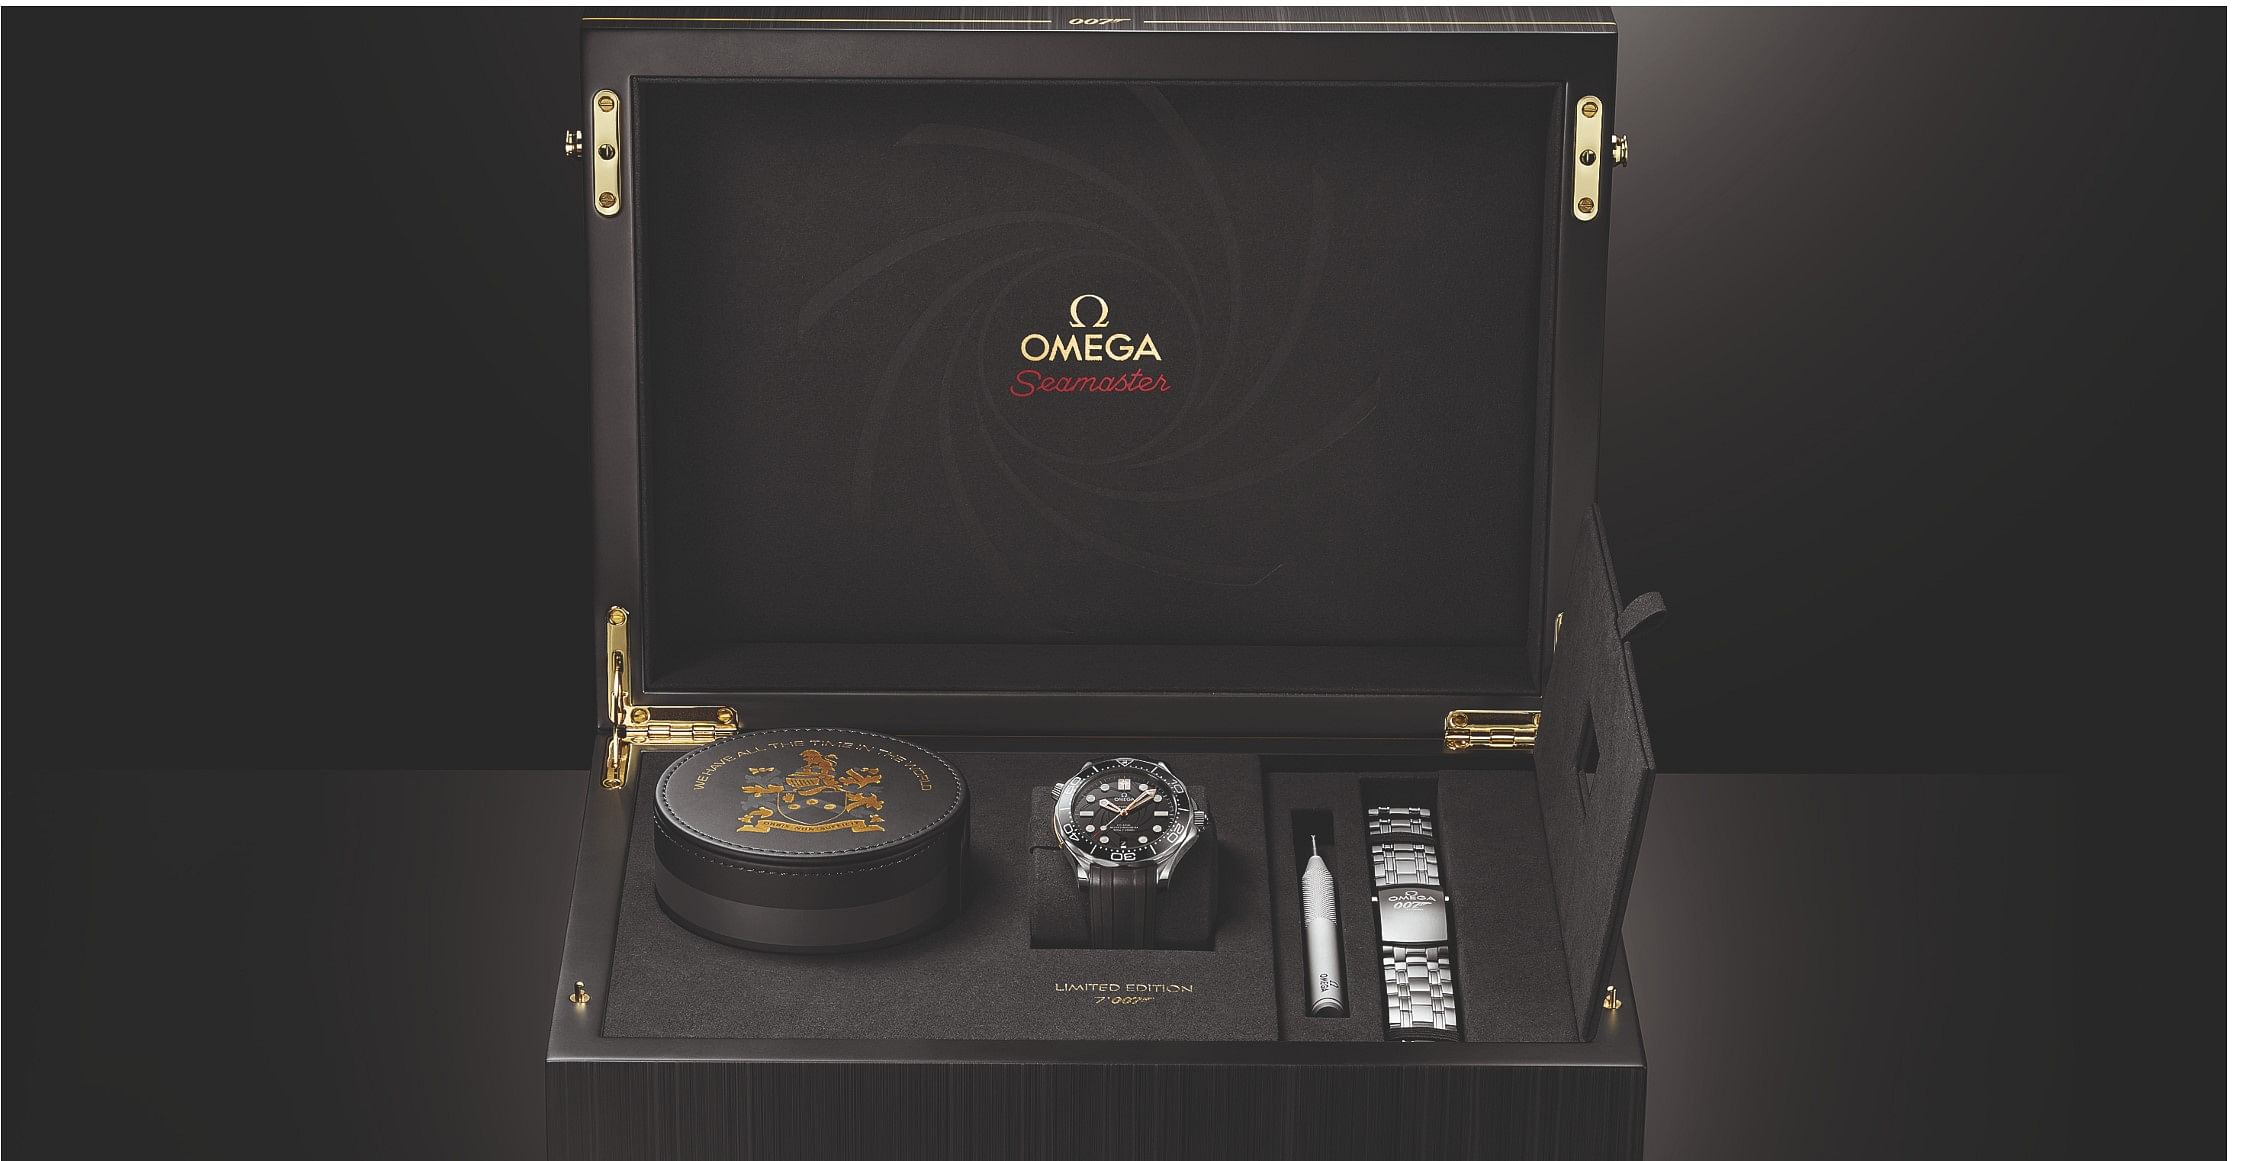 Omega, Seamaster Diver 300M, James Bond, 007 movie, James Bond movie, watches, limited edition watches, On Her Majesty’s Secret Service